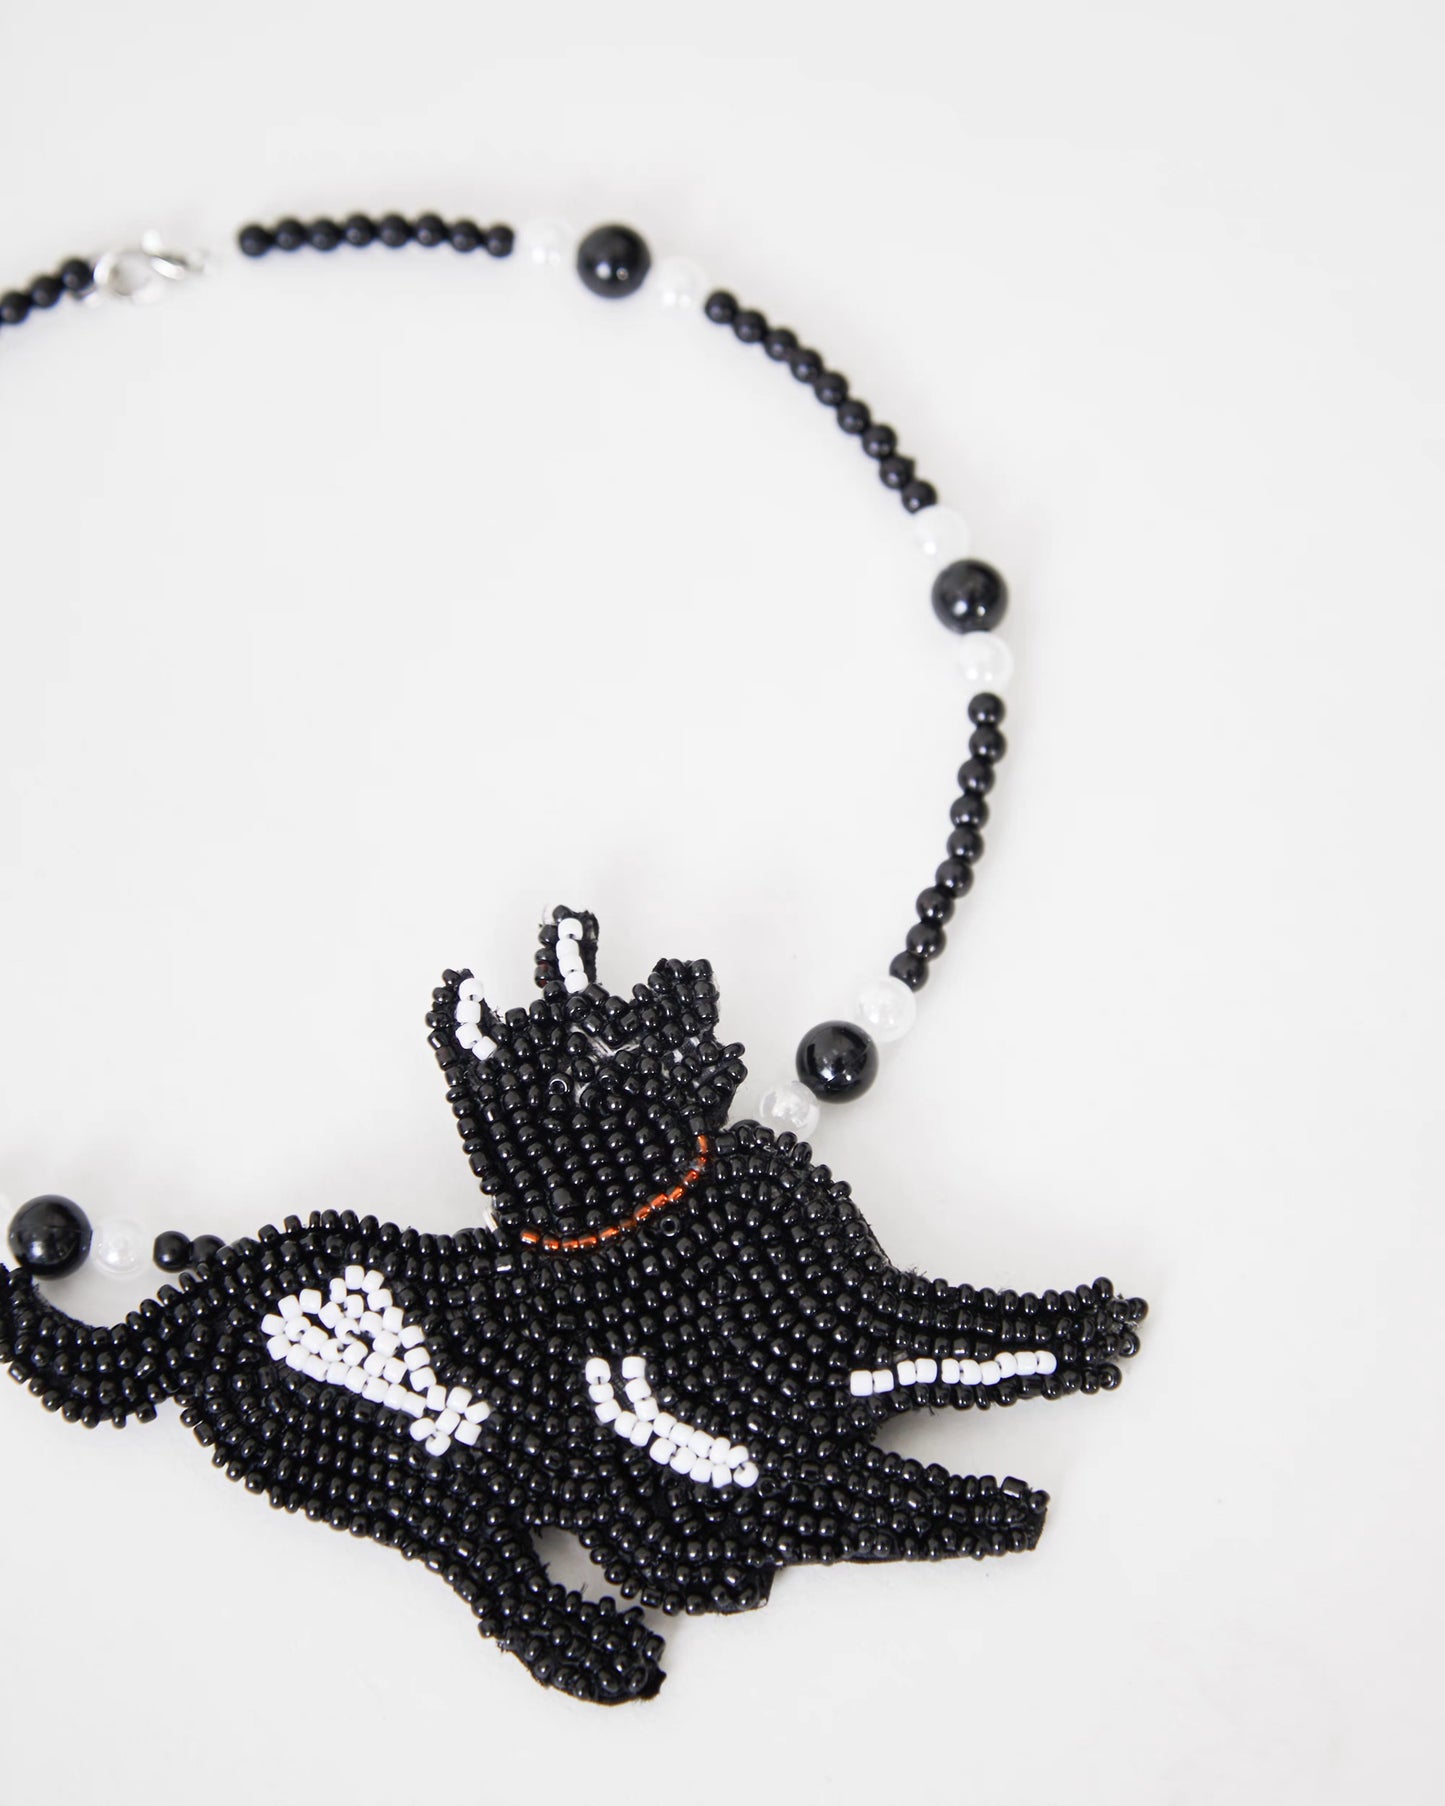 niche dog bead embroidery necklace